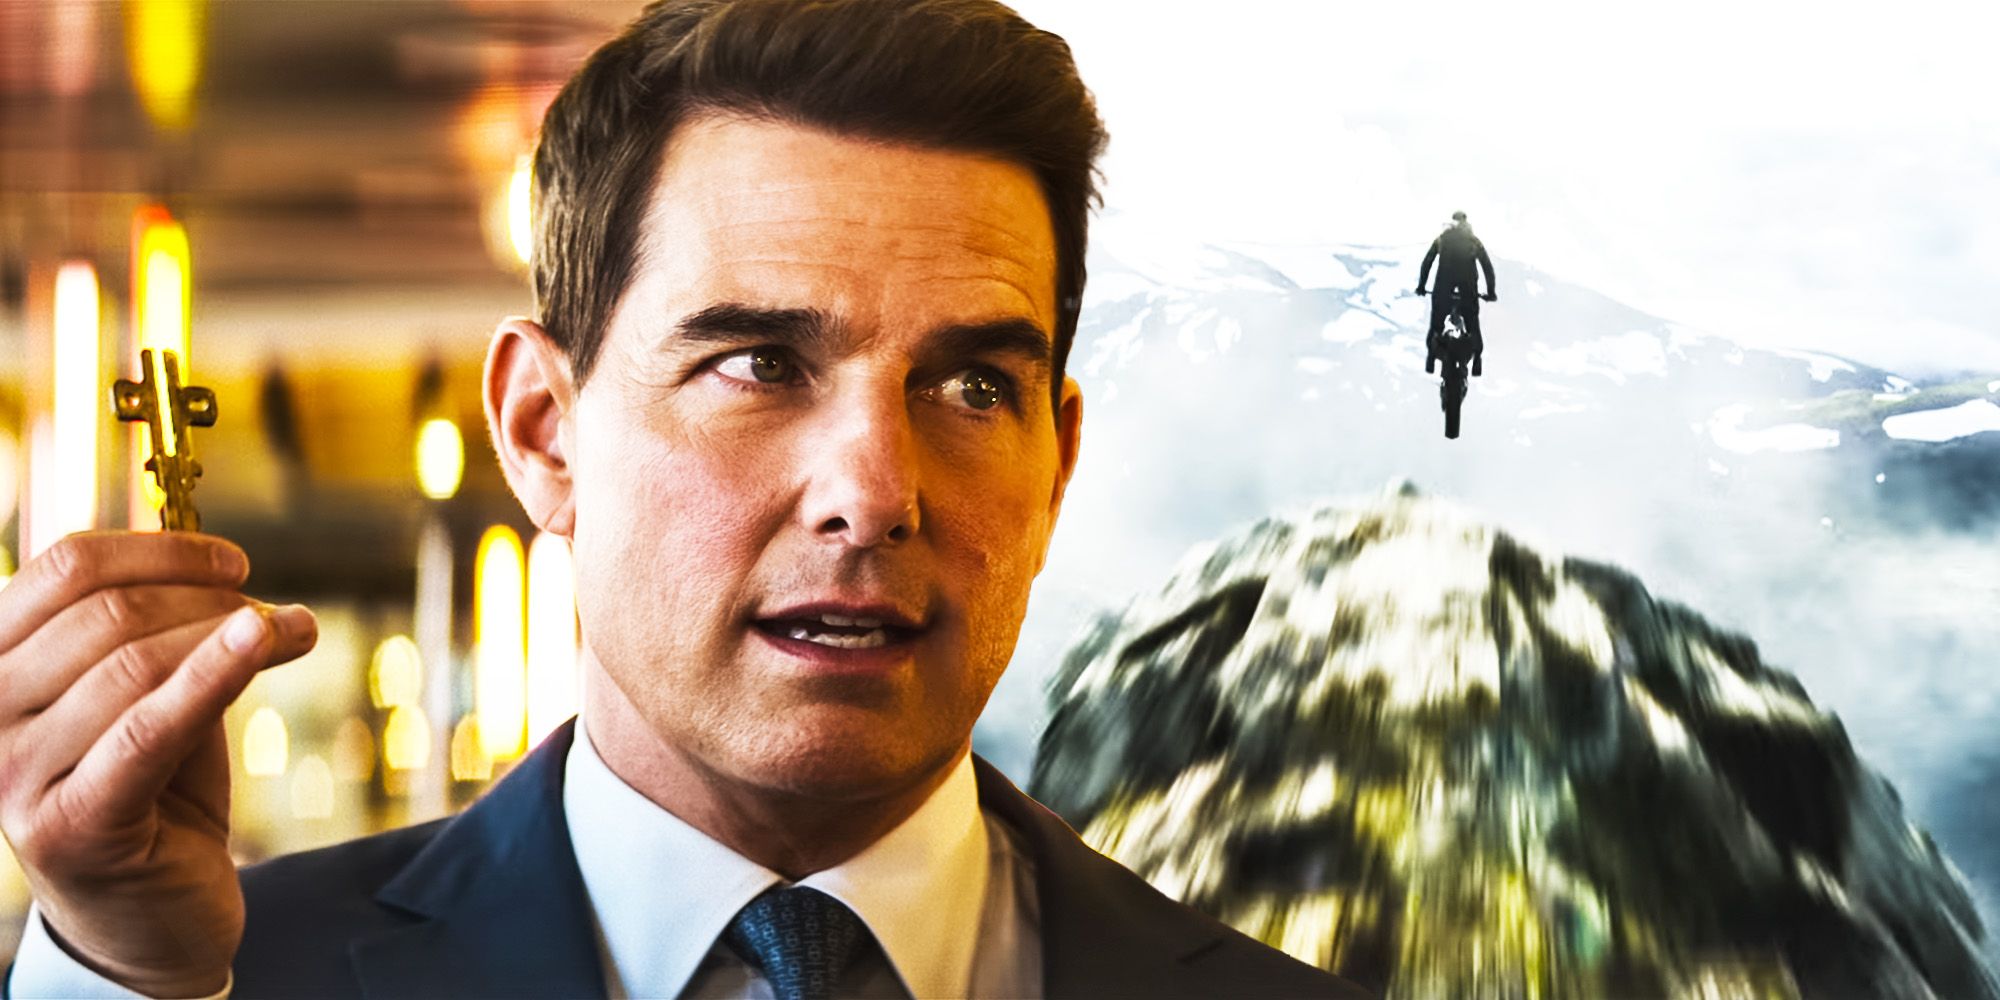 Tom Cruise in mission impossible dead reckoning driving motorcycle of cliff stunt